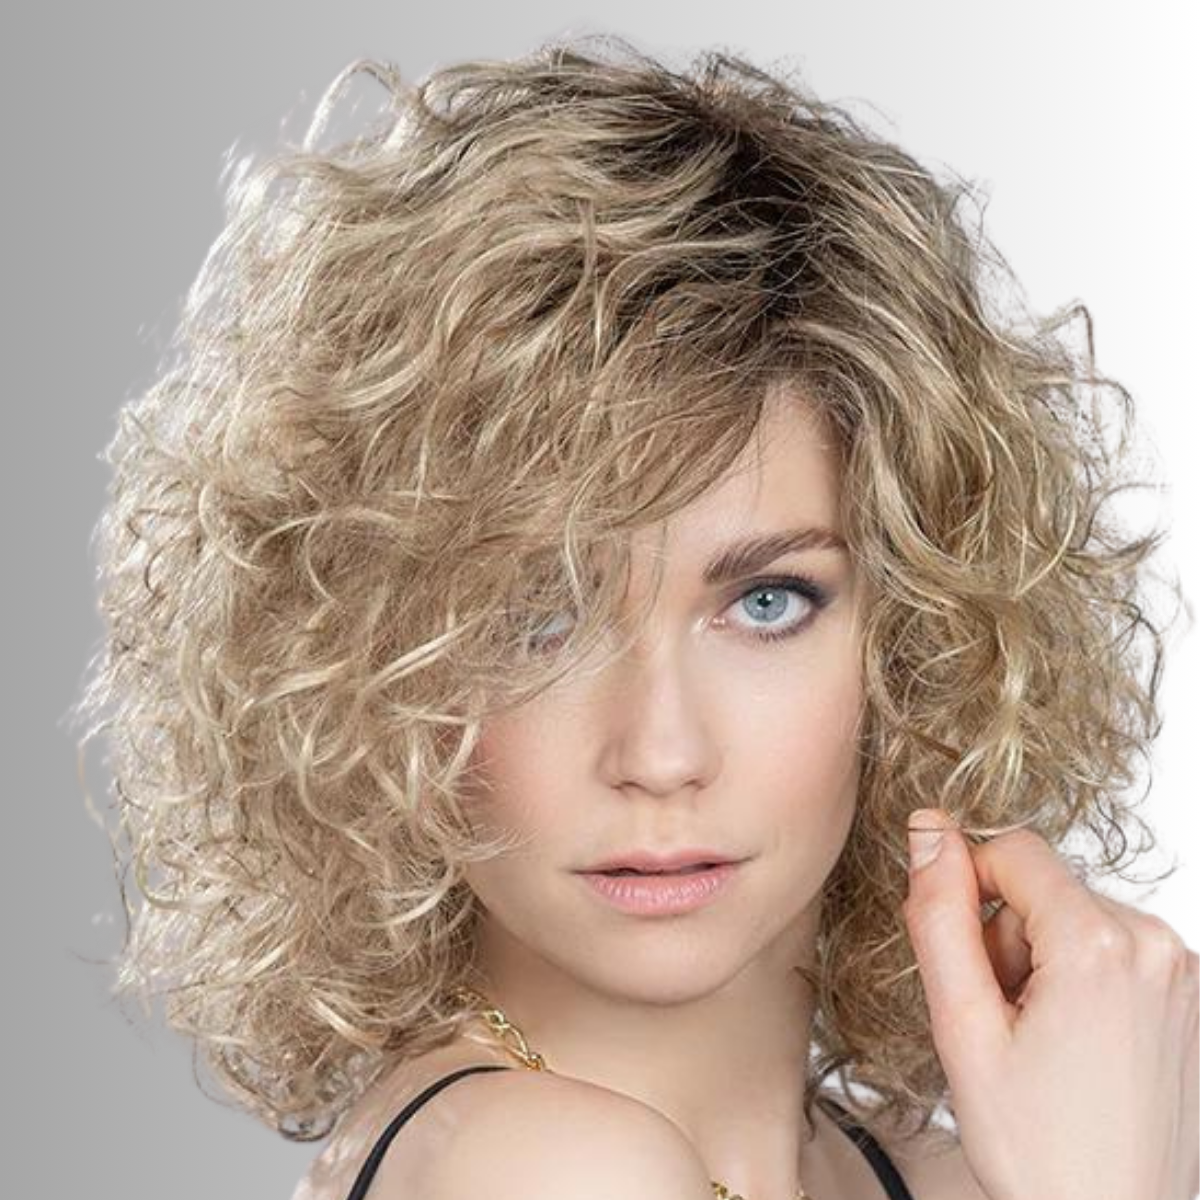 Storyville - Hair Power Collection by Ellen Wille